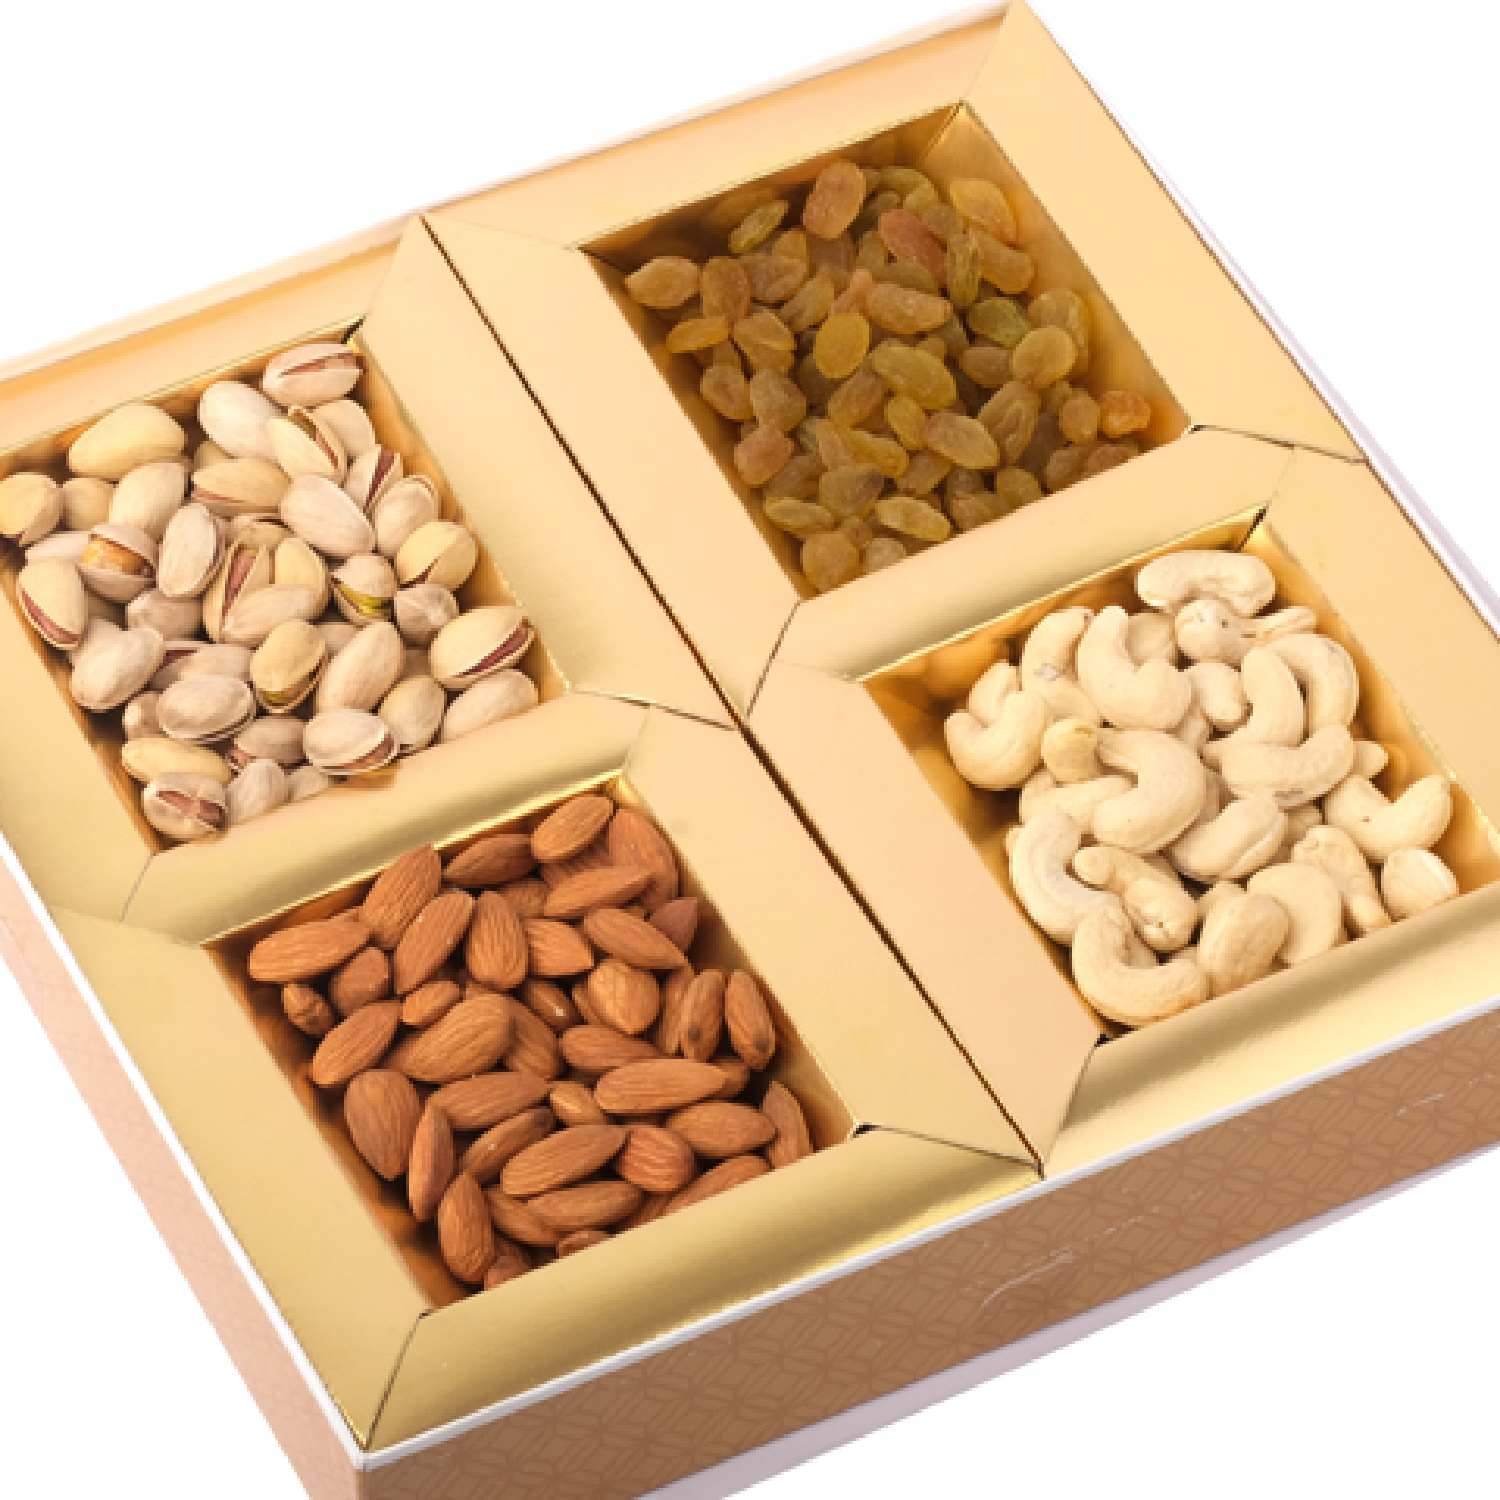 Sympathy Gift Baskets: Grand Dried Fruits and Nuts Tray | eCondolence.com